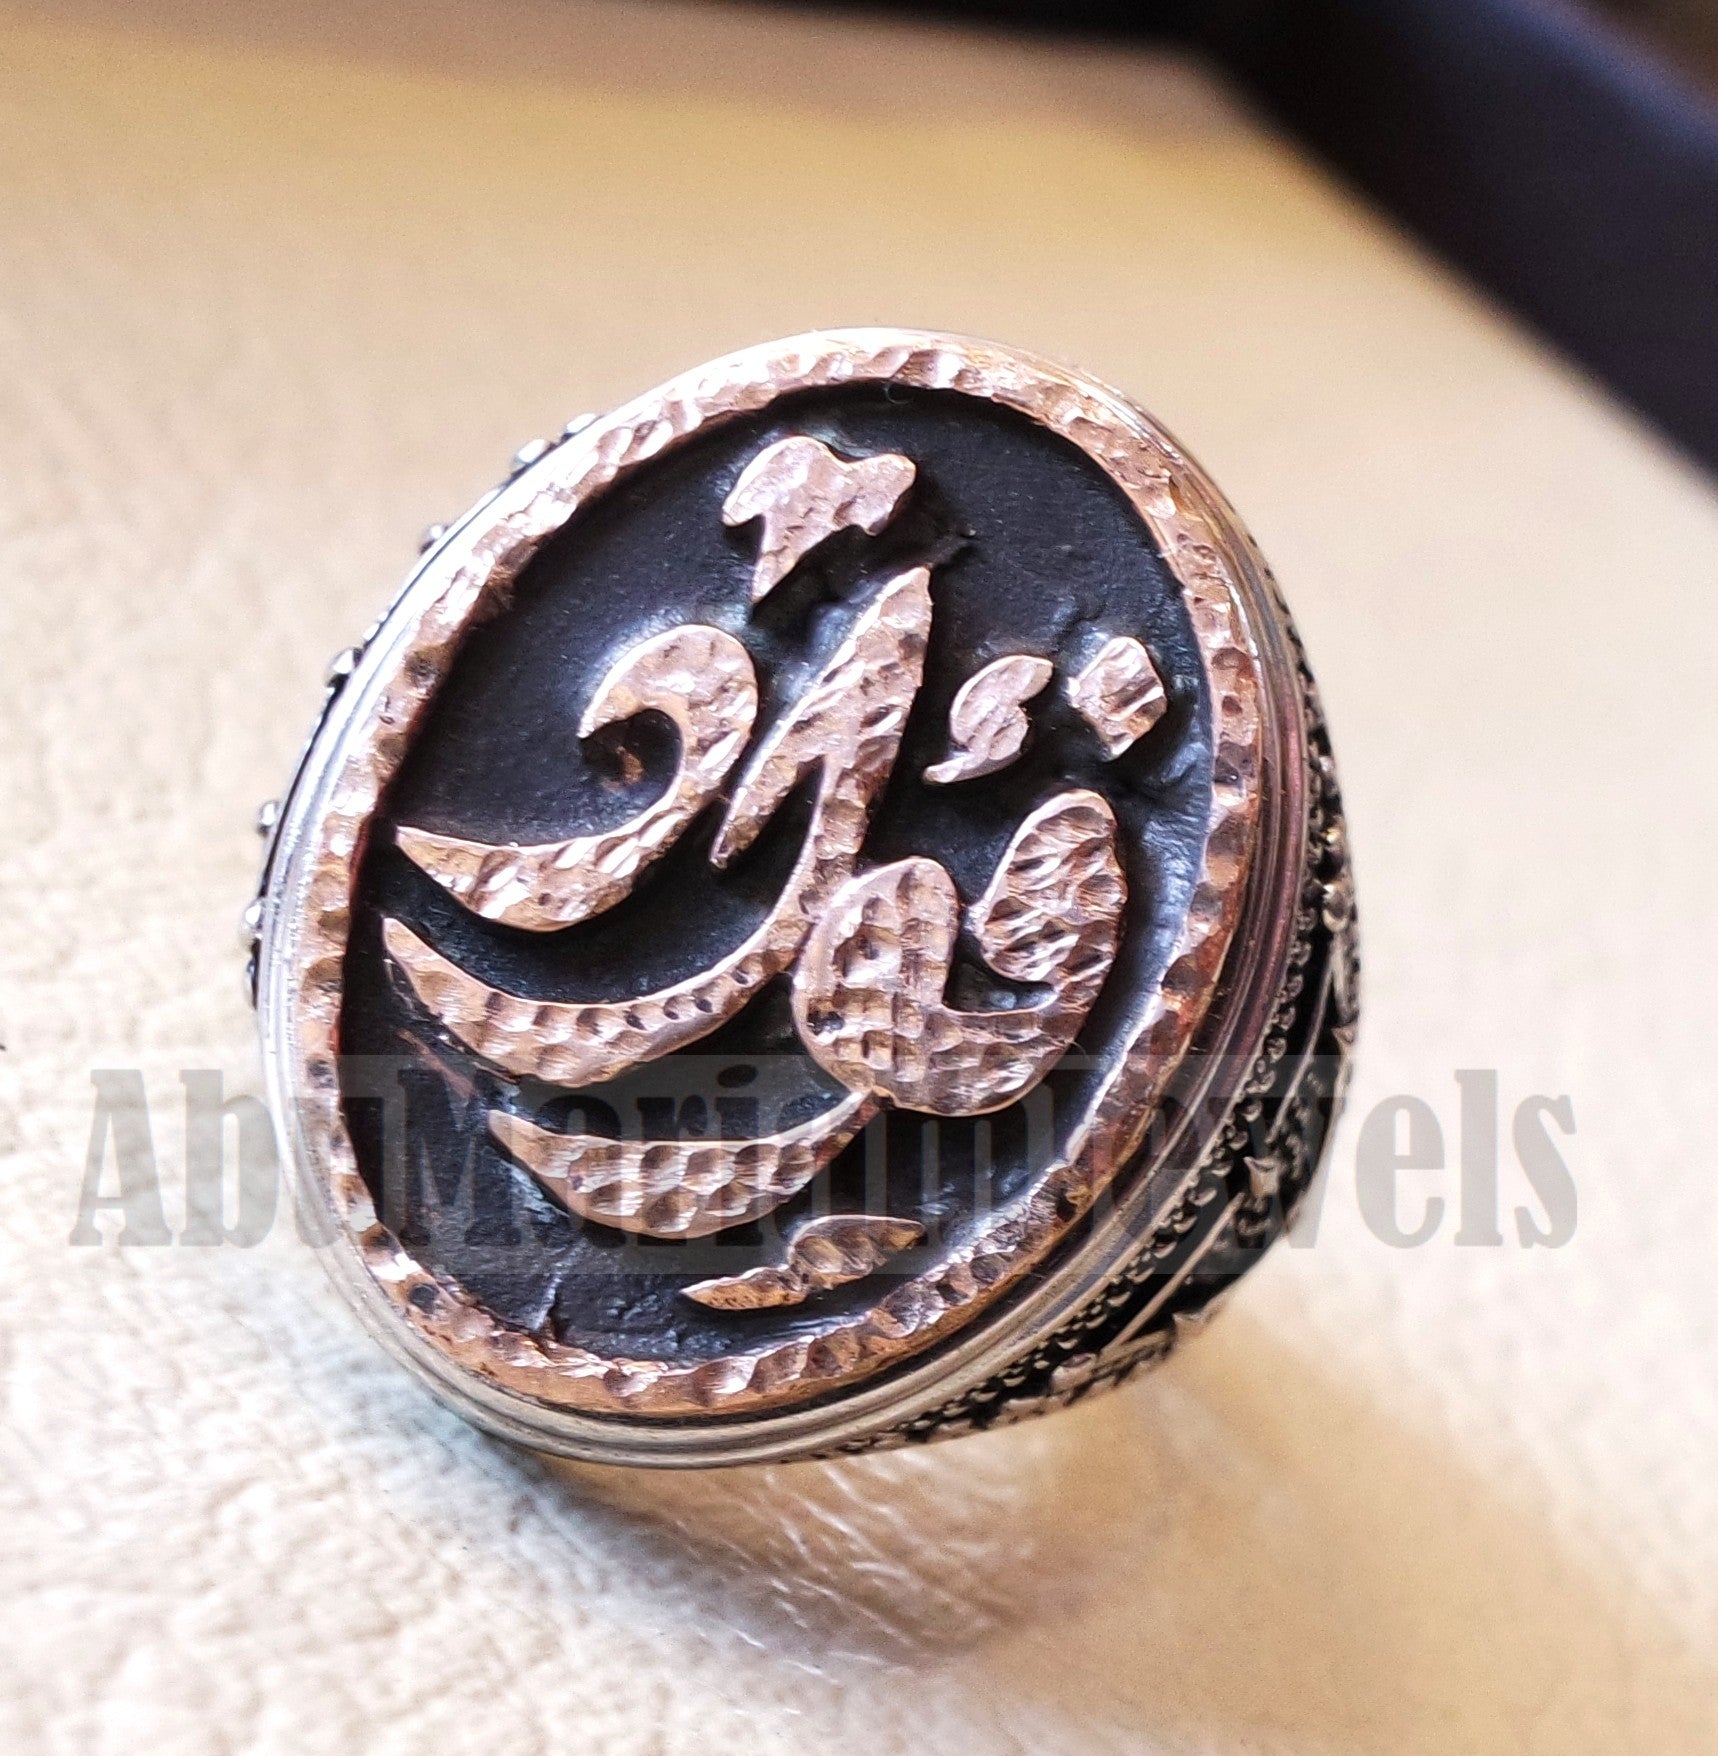 Customized Arabic calligraphy names ring personalized antique jewelry style sterling silver 925 and bronze any size TSB1004 خاتم اسم تفصيل